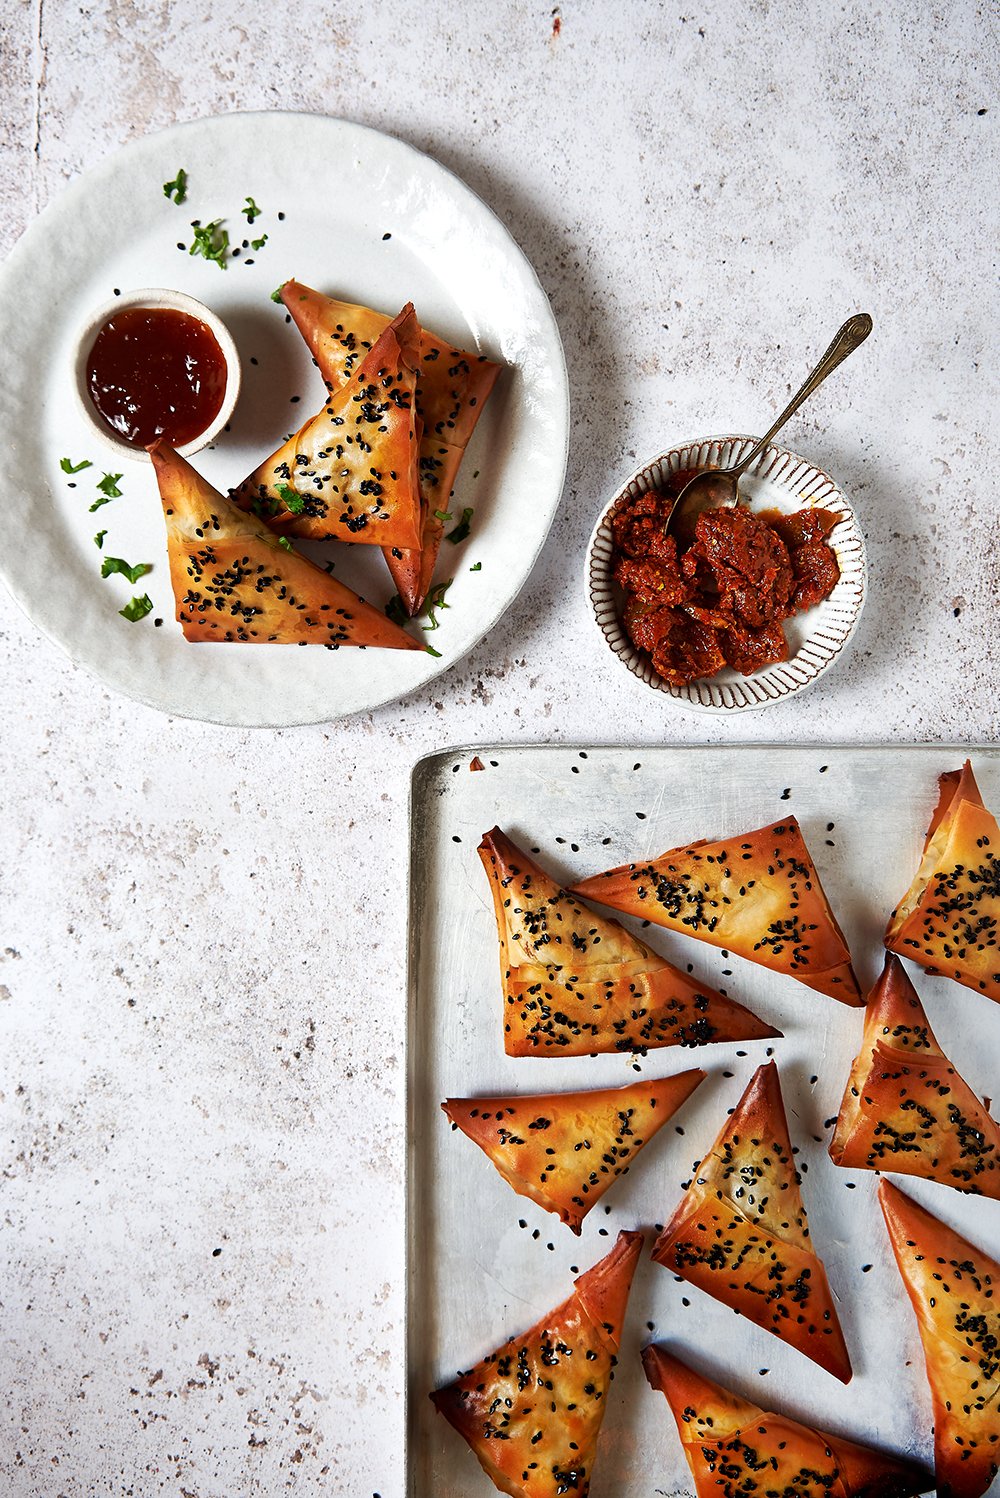 Baking tray and plate with samosas